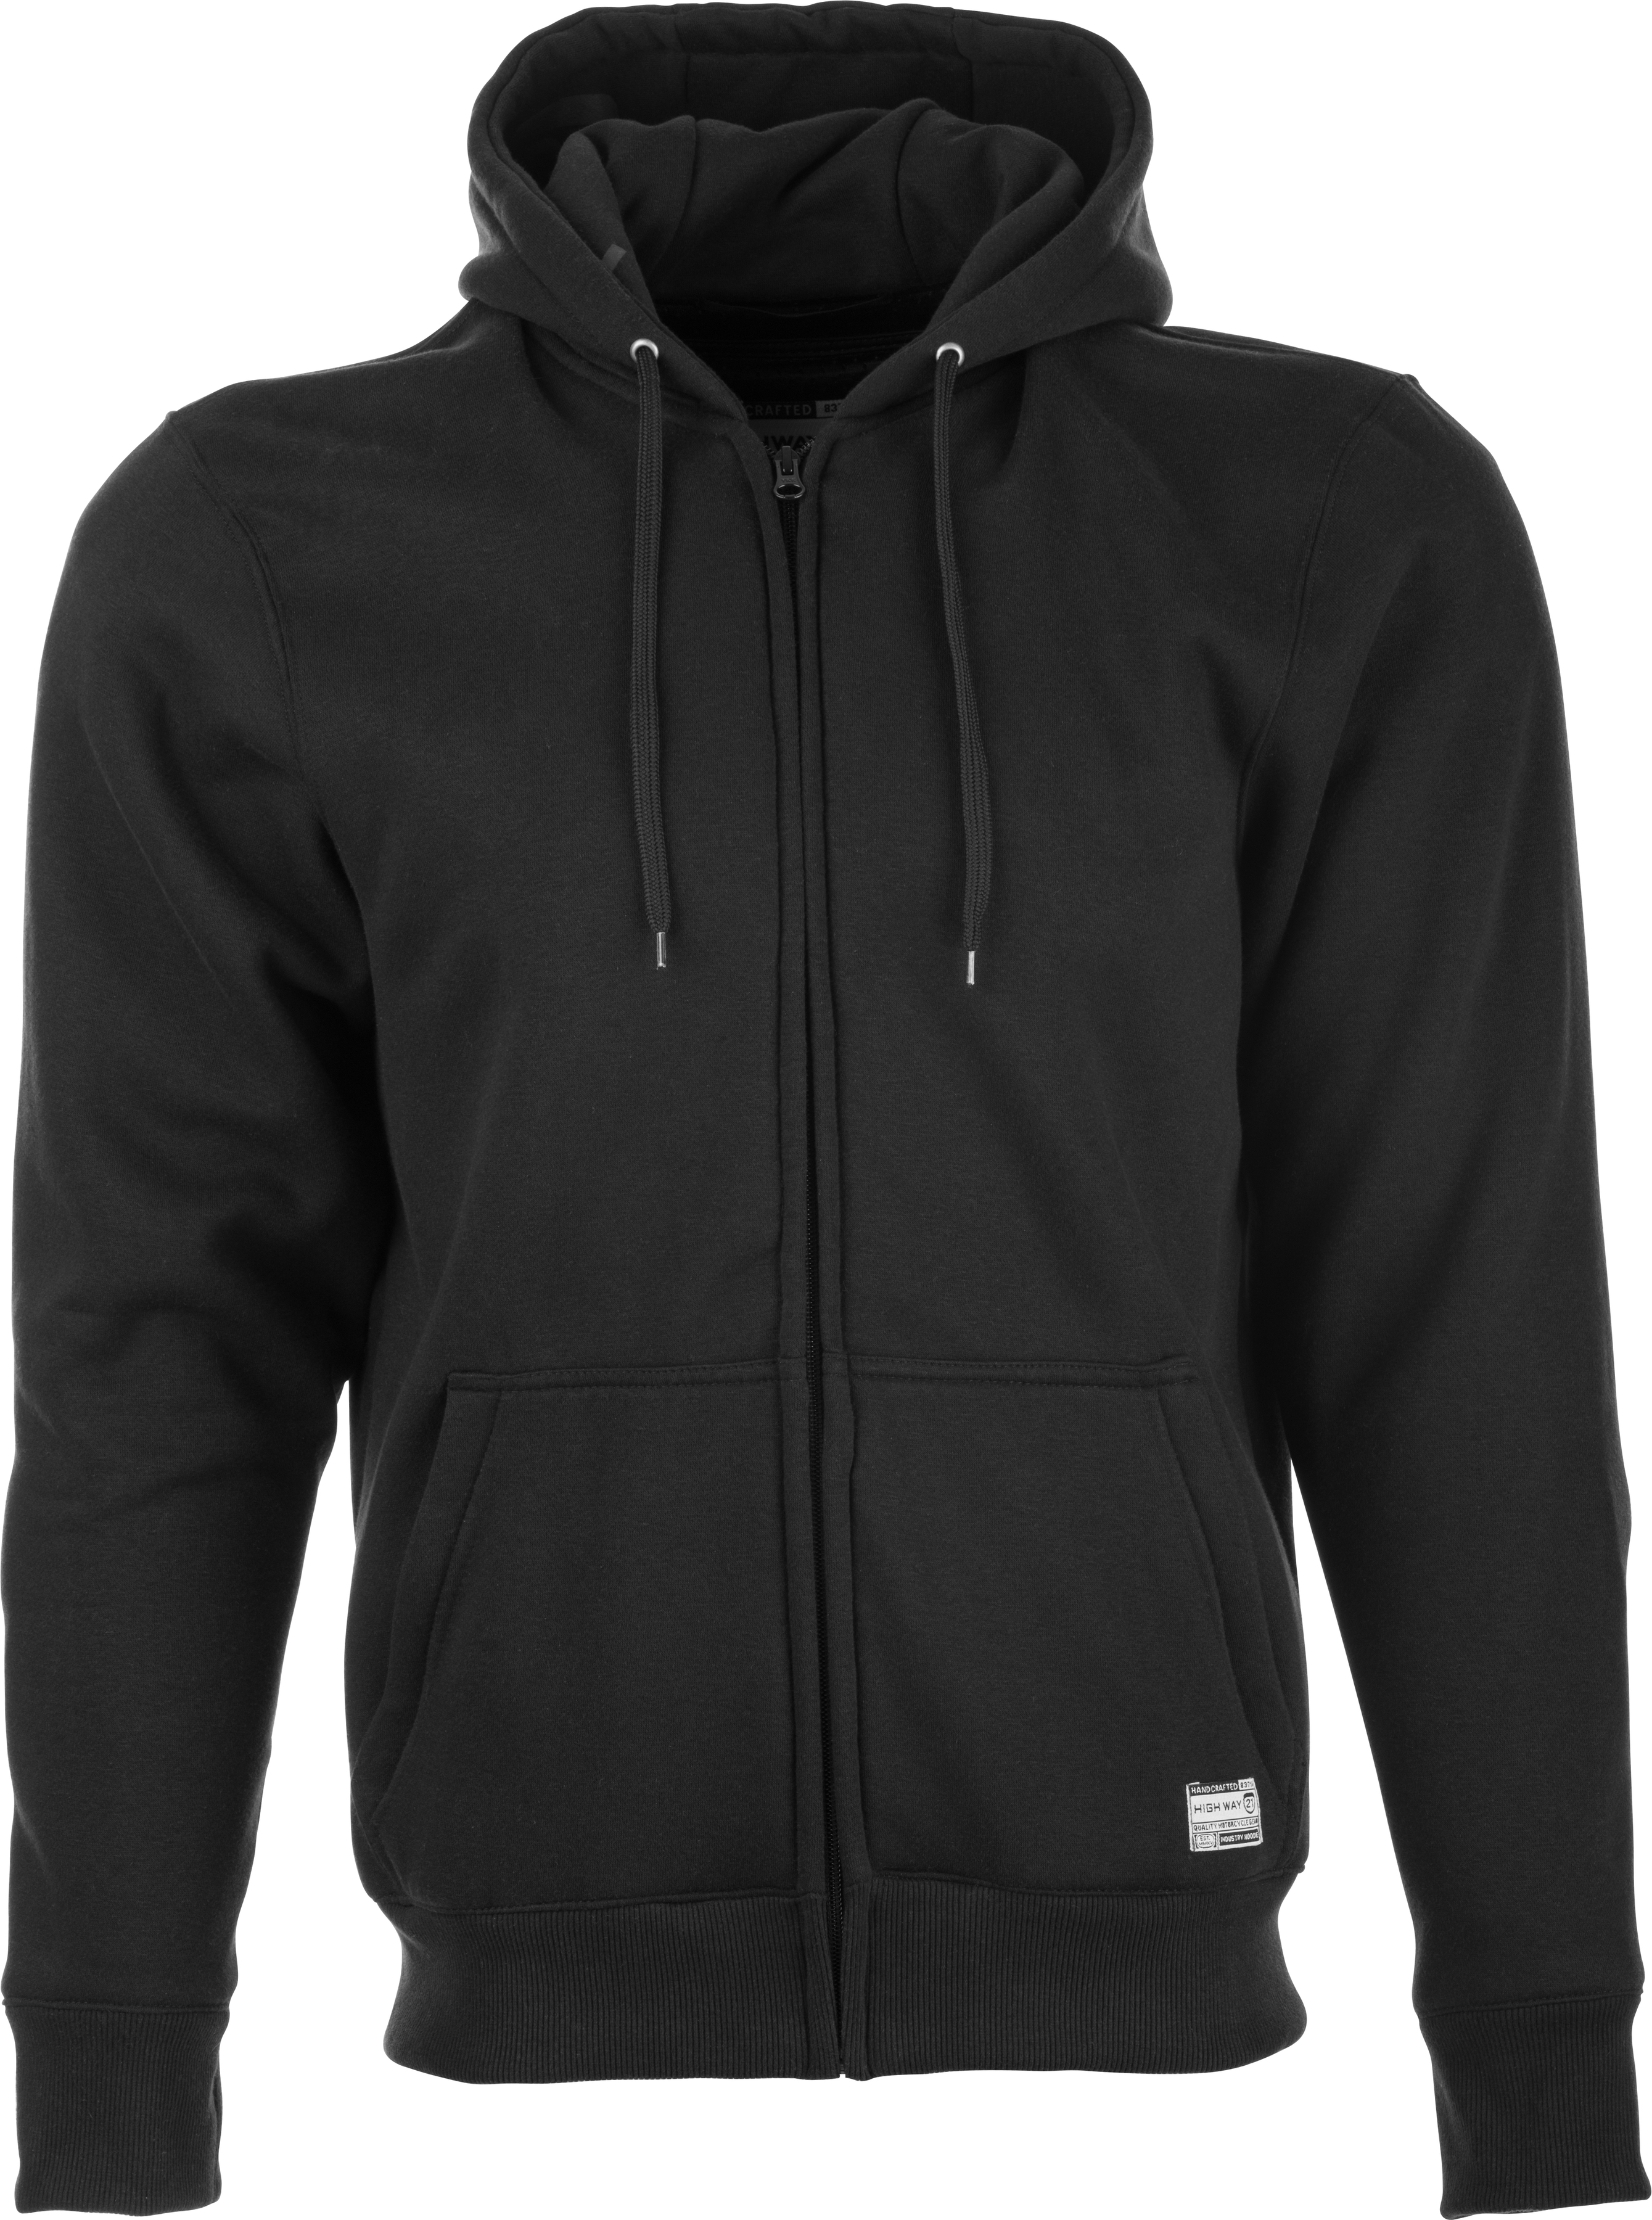 Industry Corporate Hoodie Black 4X-Large - Click Image to Close